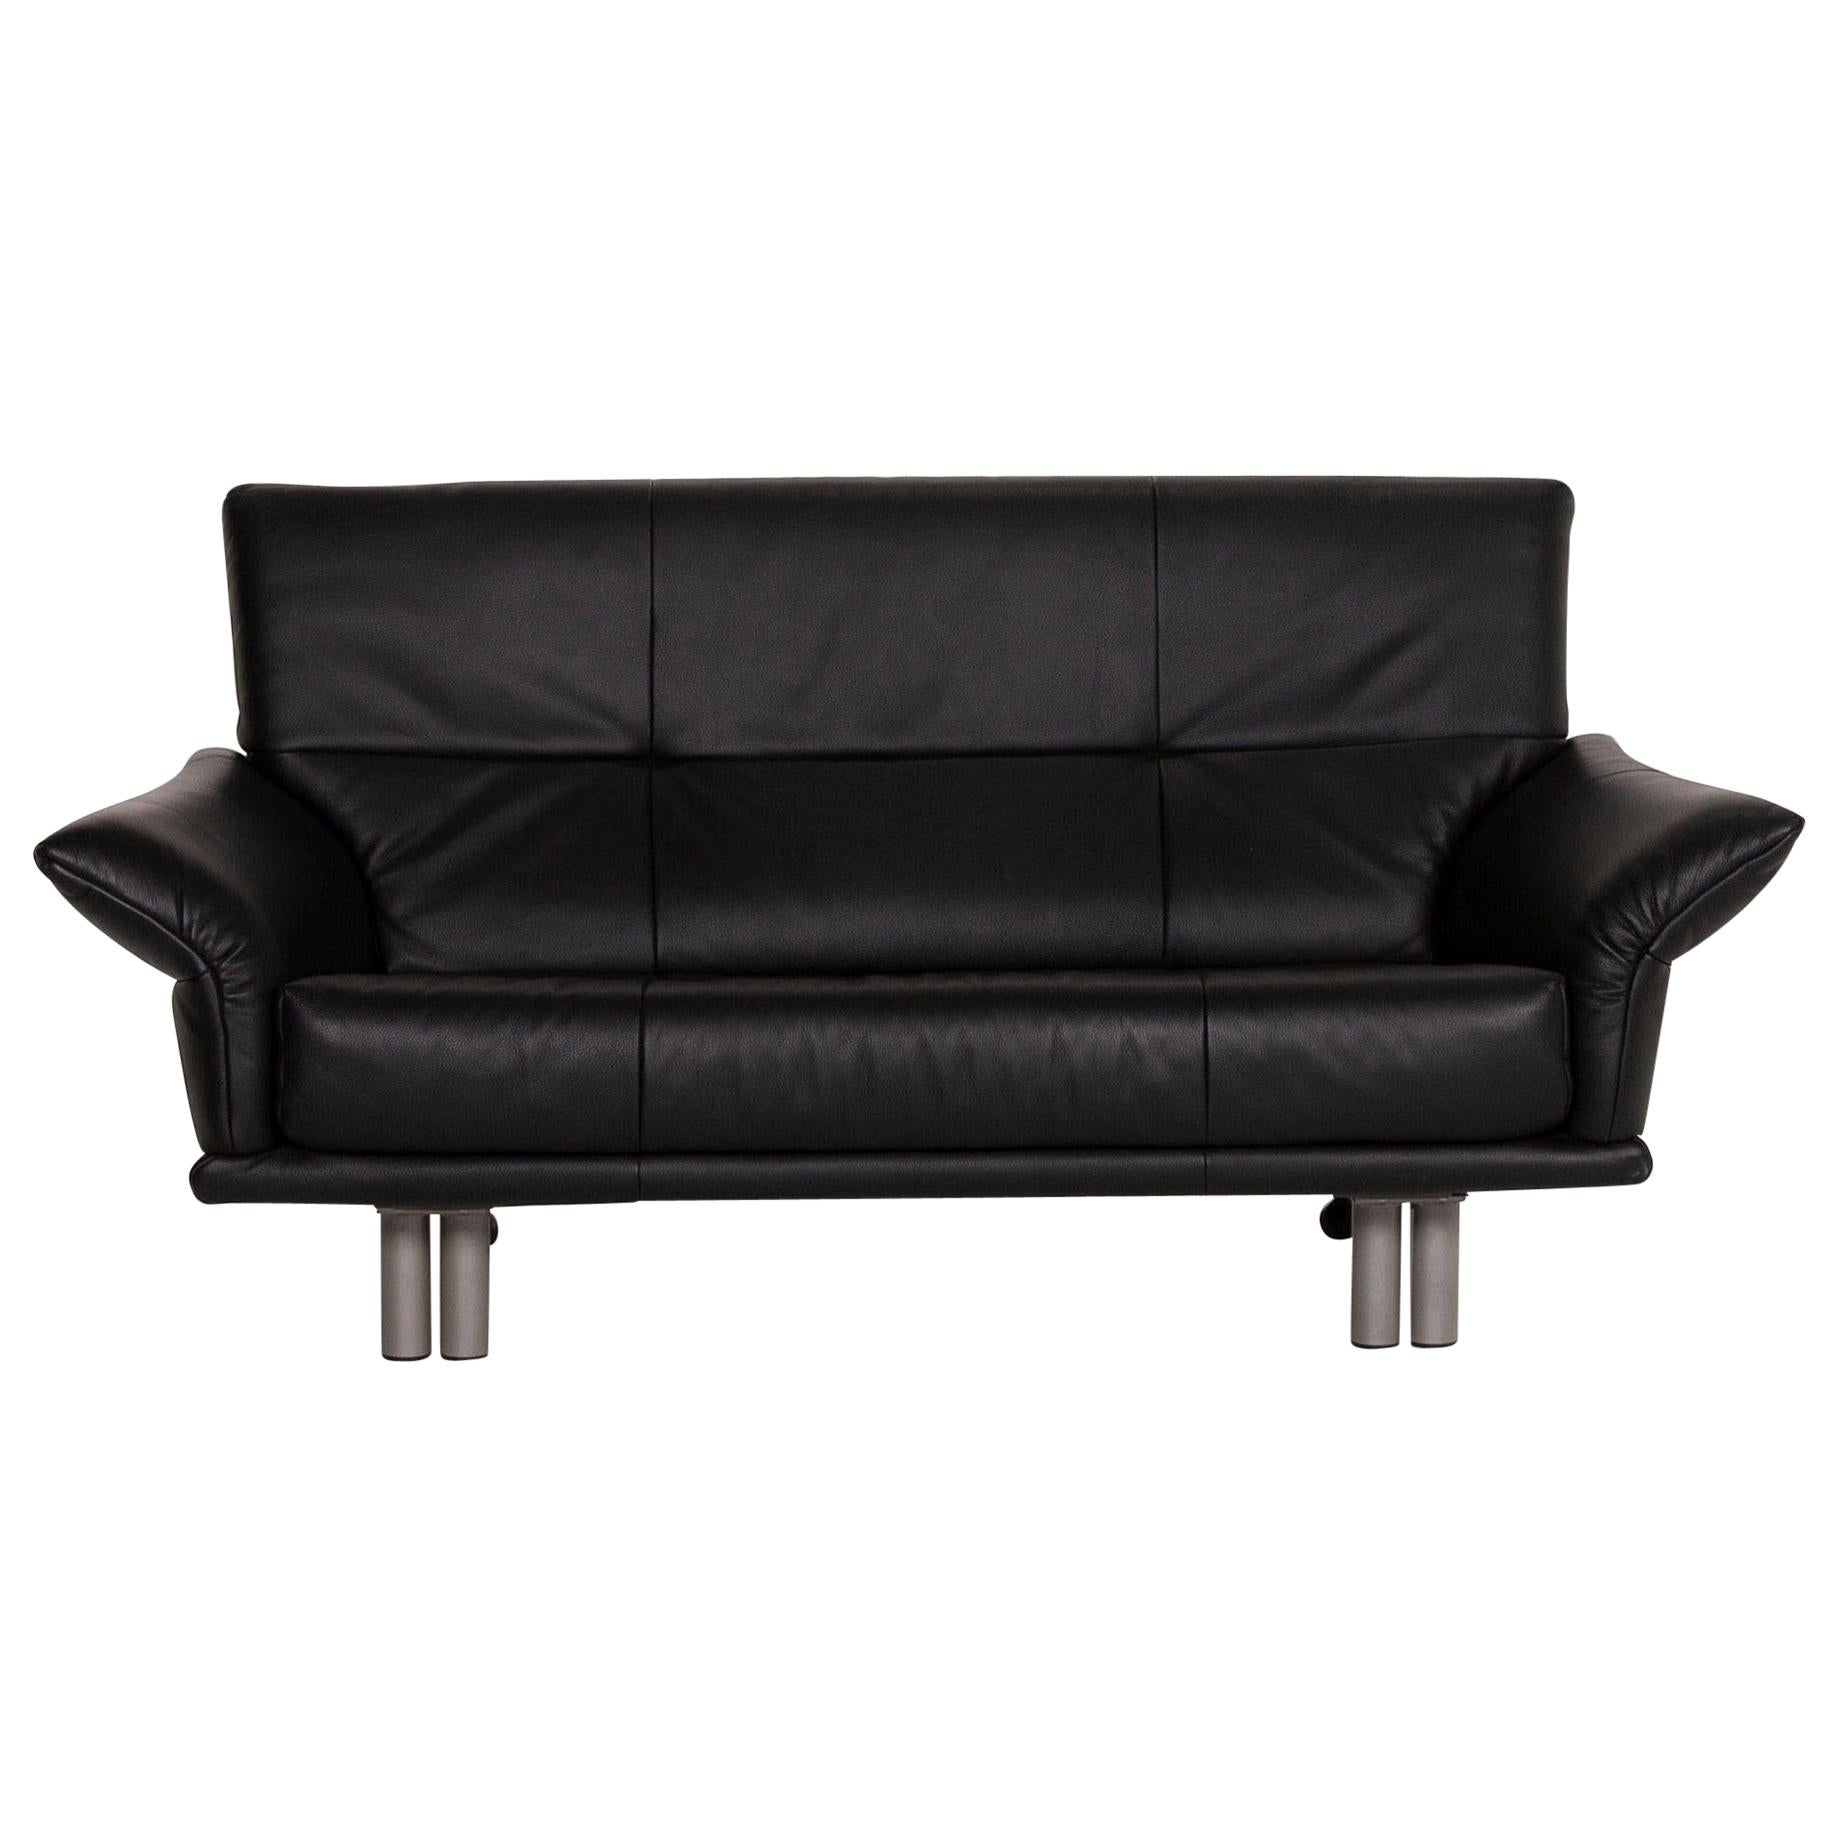 Rolf Benz Leather Sofa Black Two-Seat For Sale